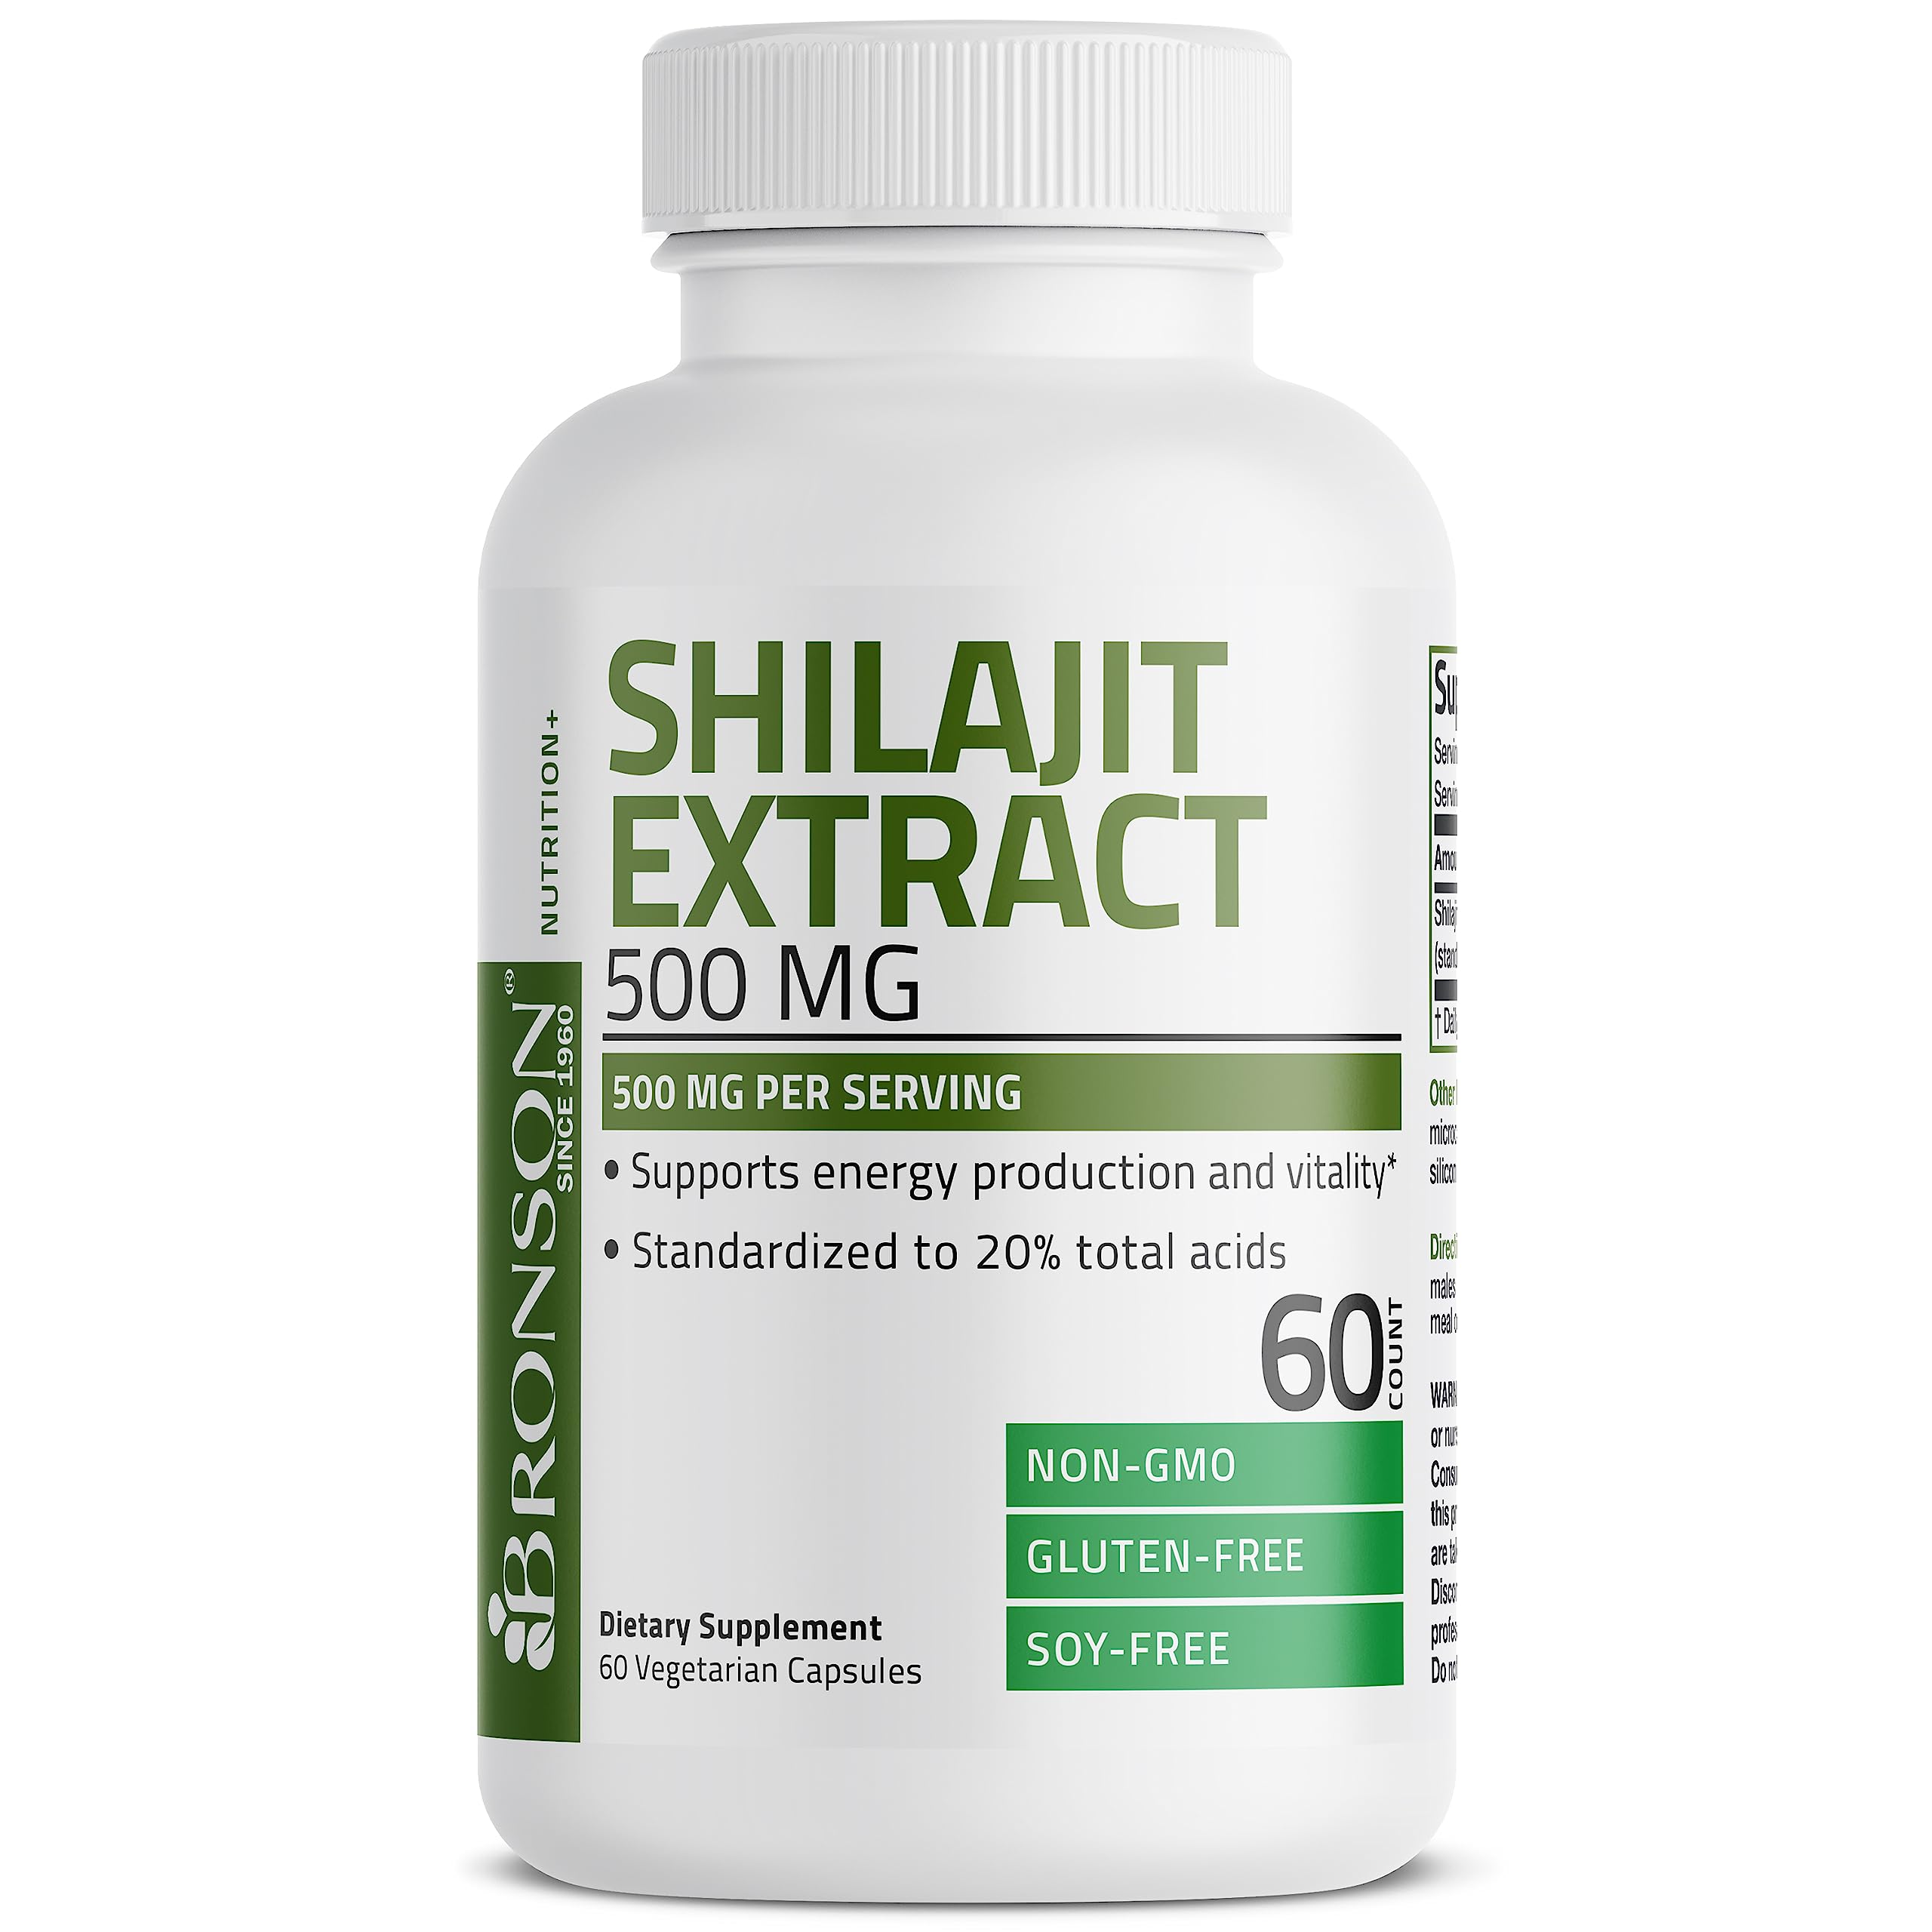 Shilajit Extract - 500 mg view 10 of 6